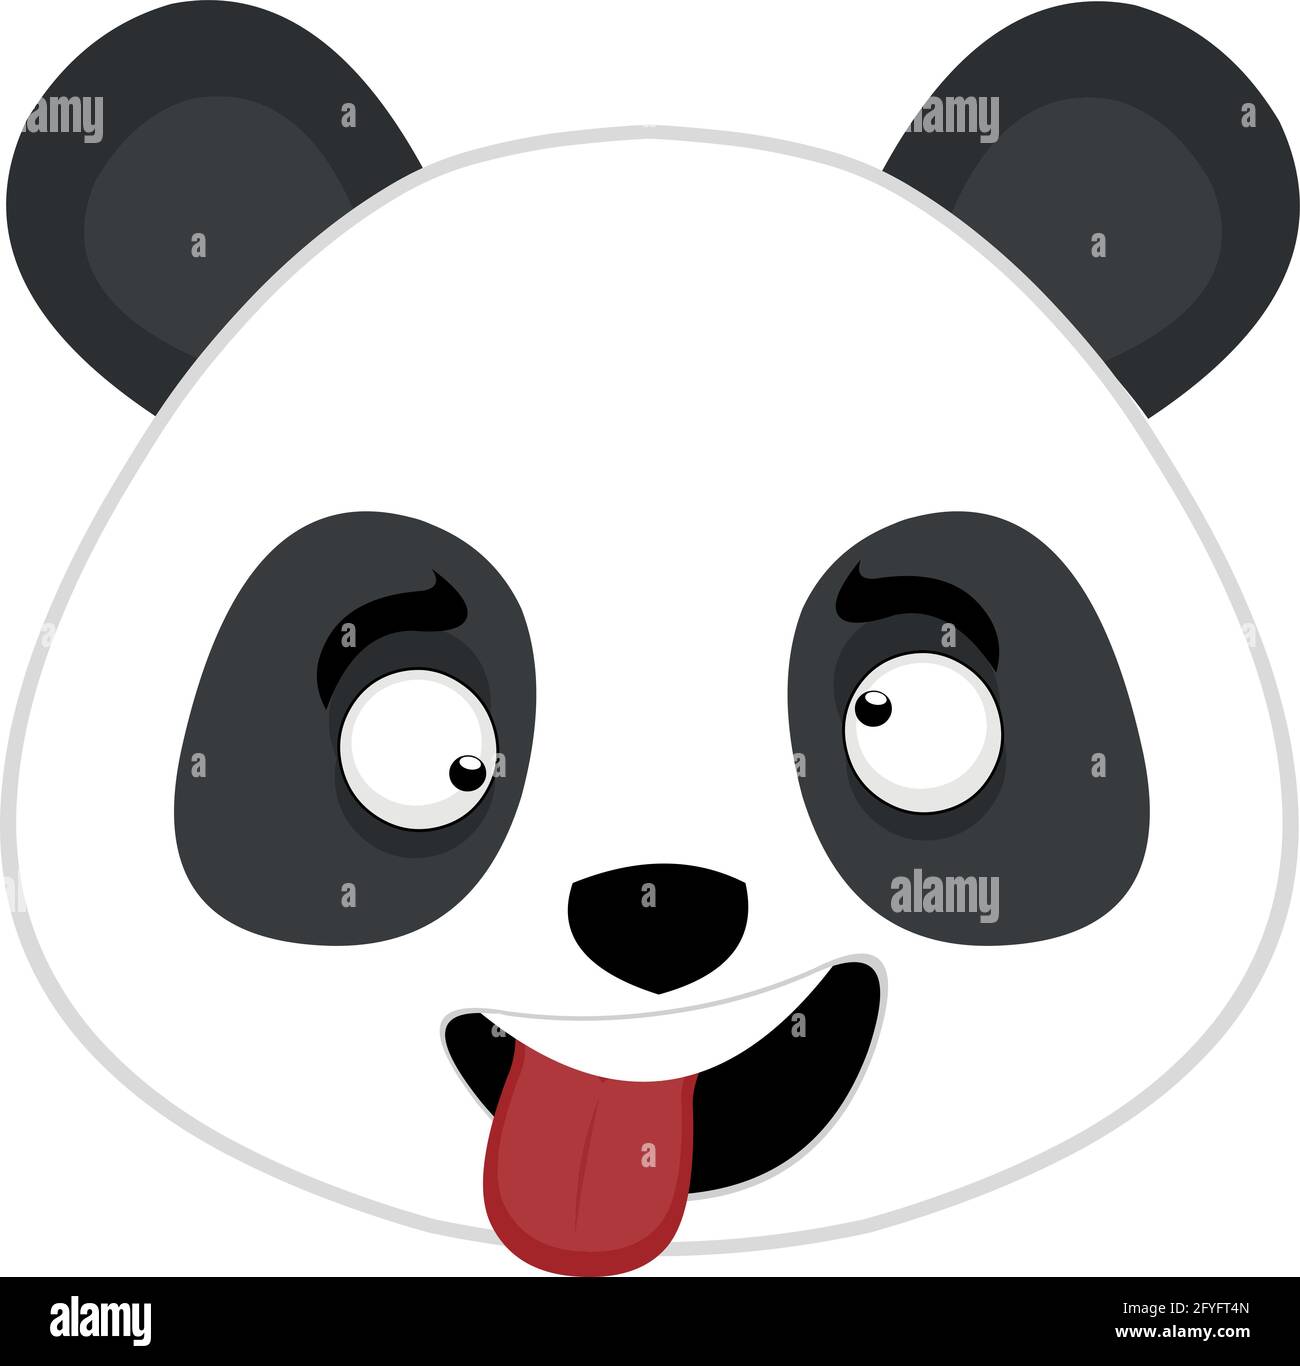 Vector emoticon illustration of the face of a cartoon panda bear with a funny expression Stock Vector